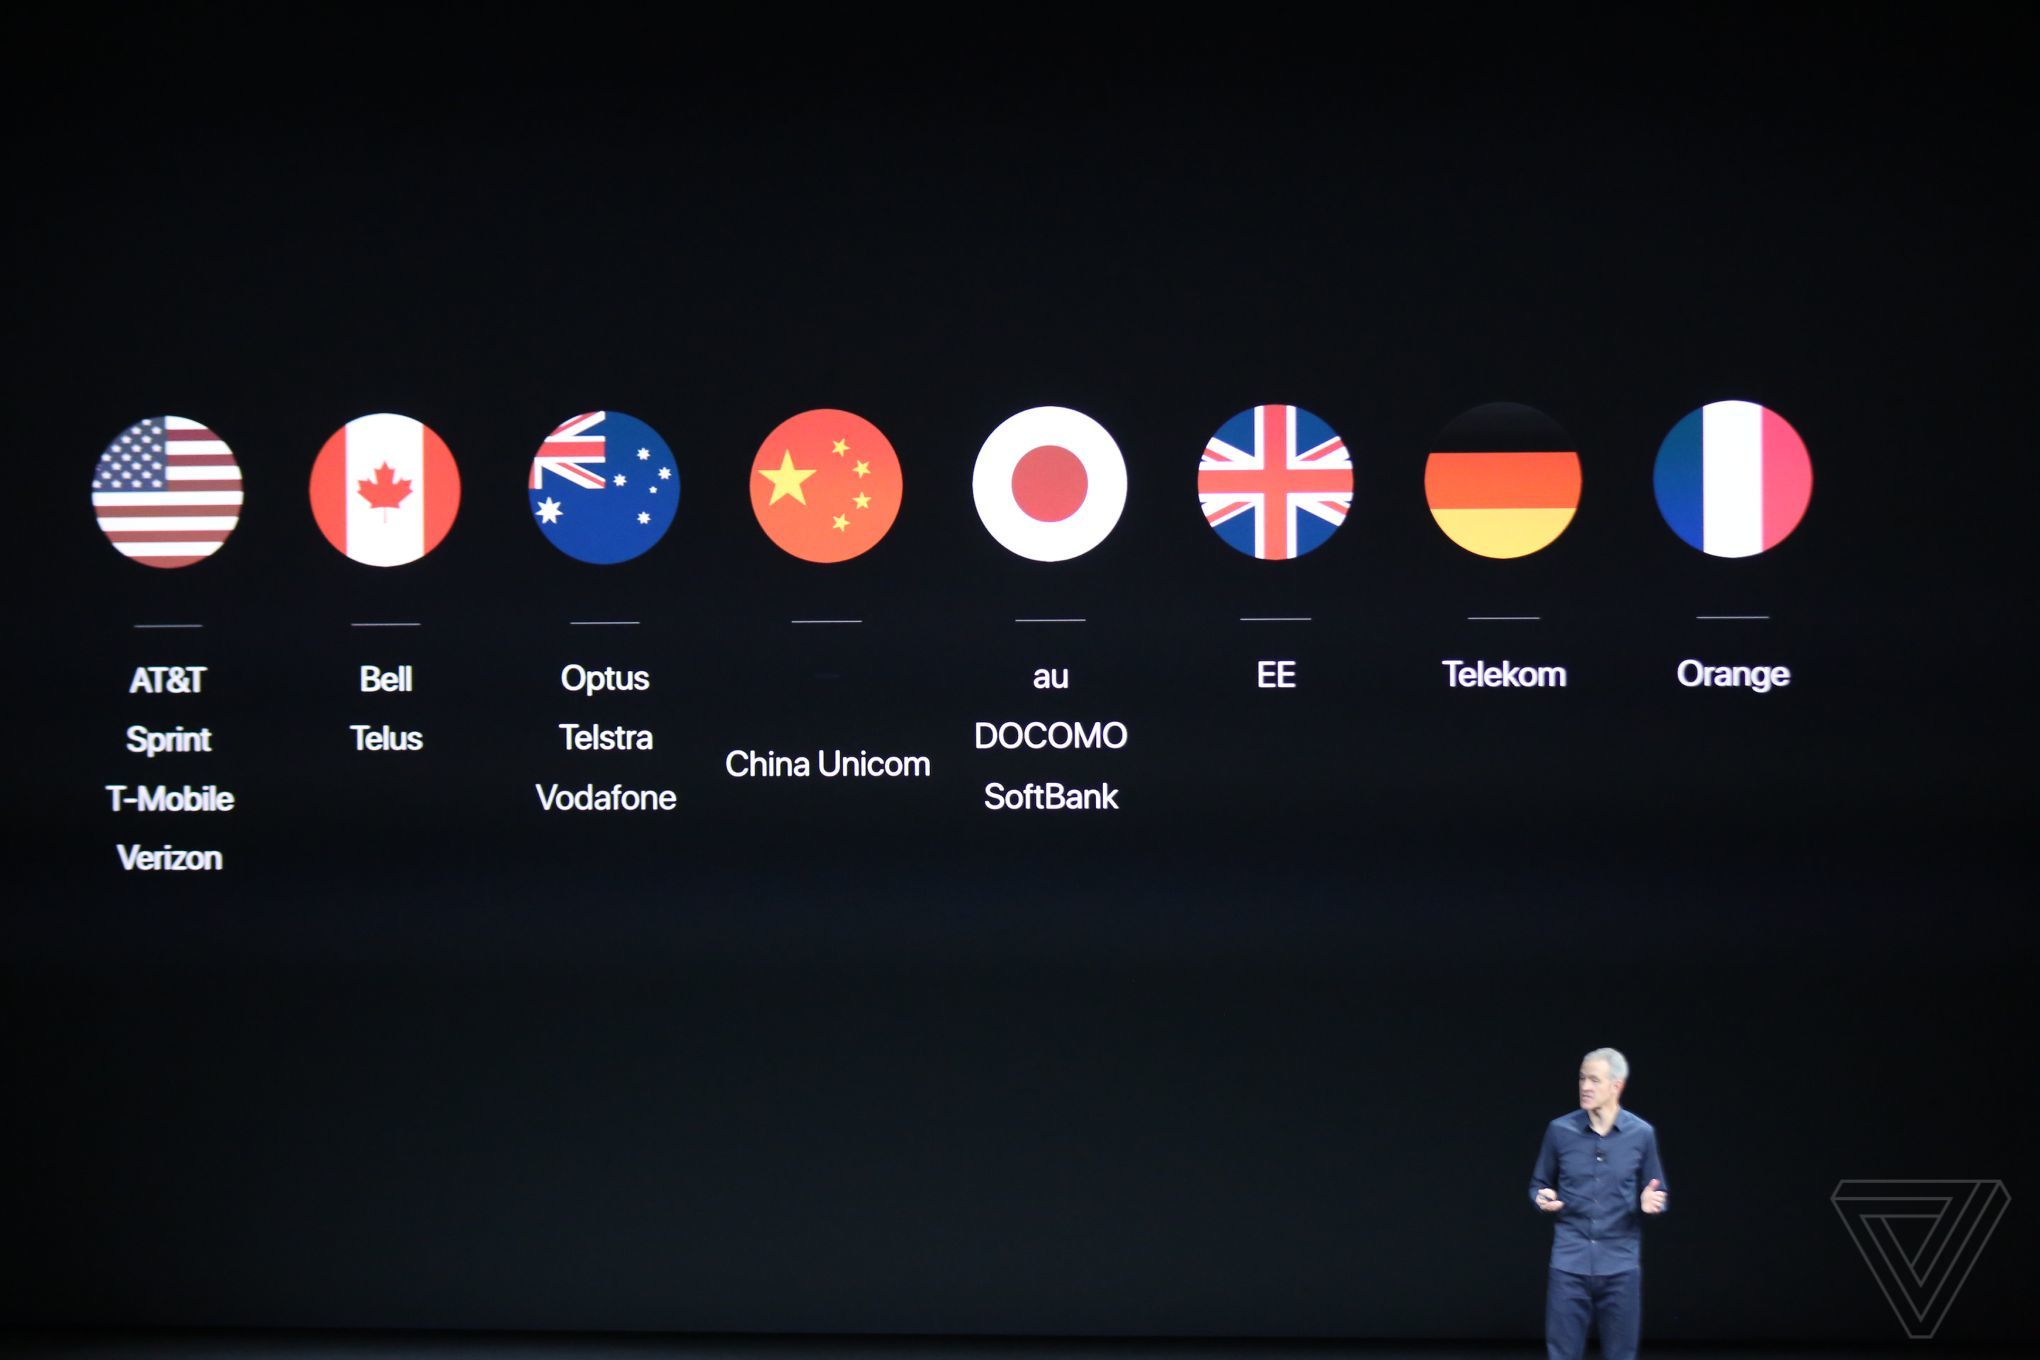 Apple Watch 3 4G countries